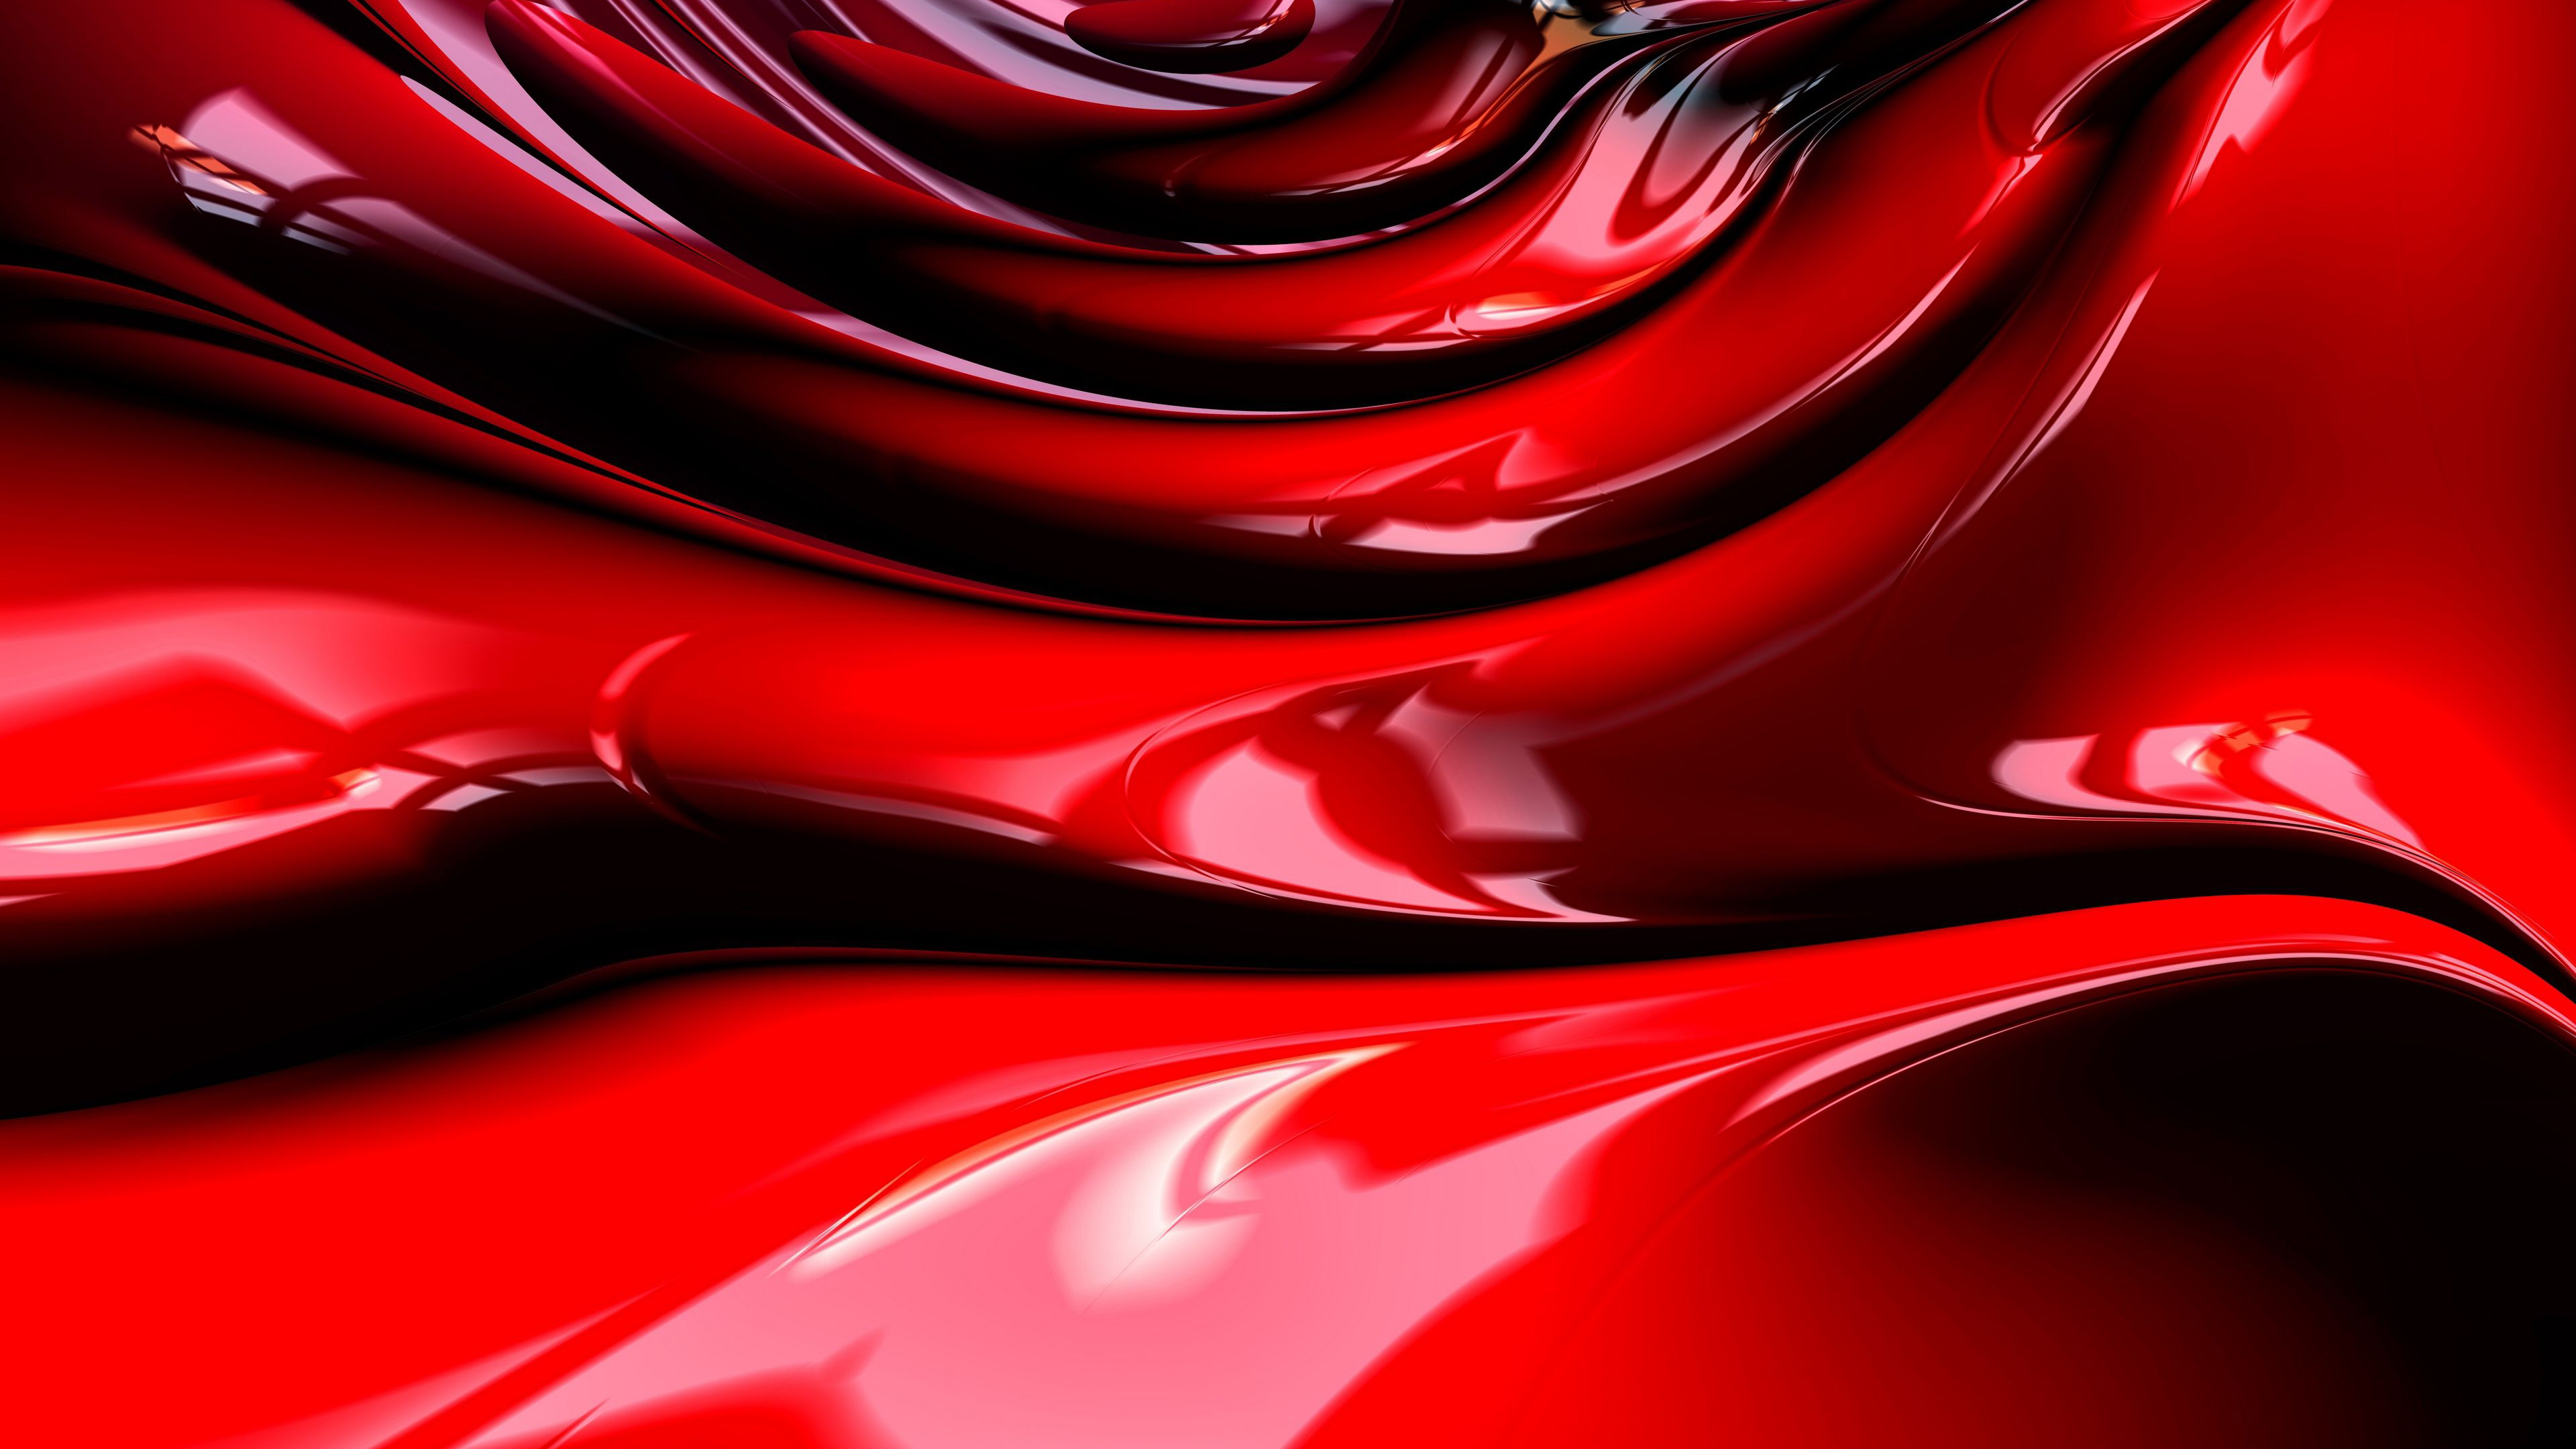 Red Background Photos Download Free Red Background Stock Photos  HD Images